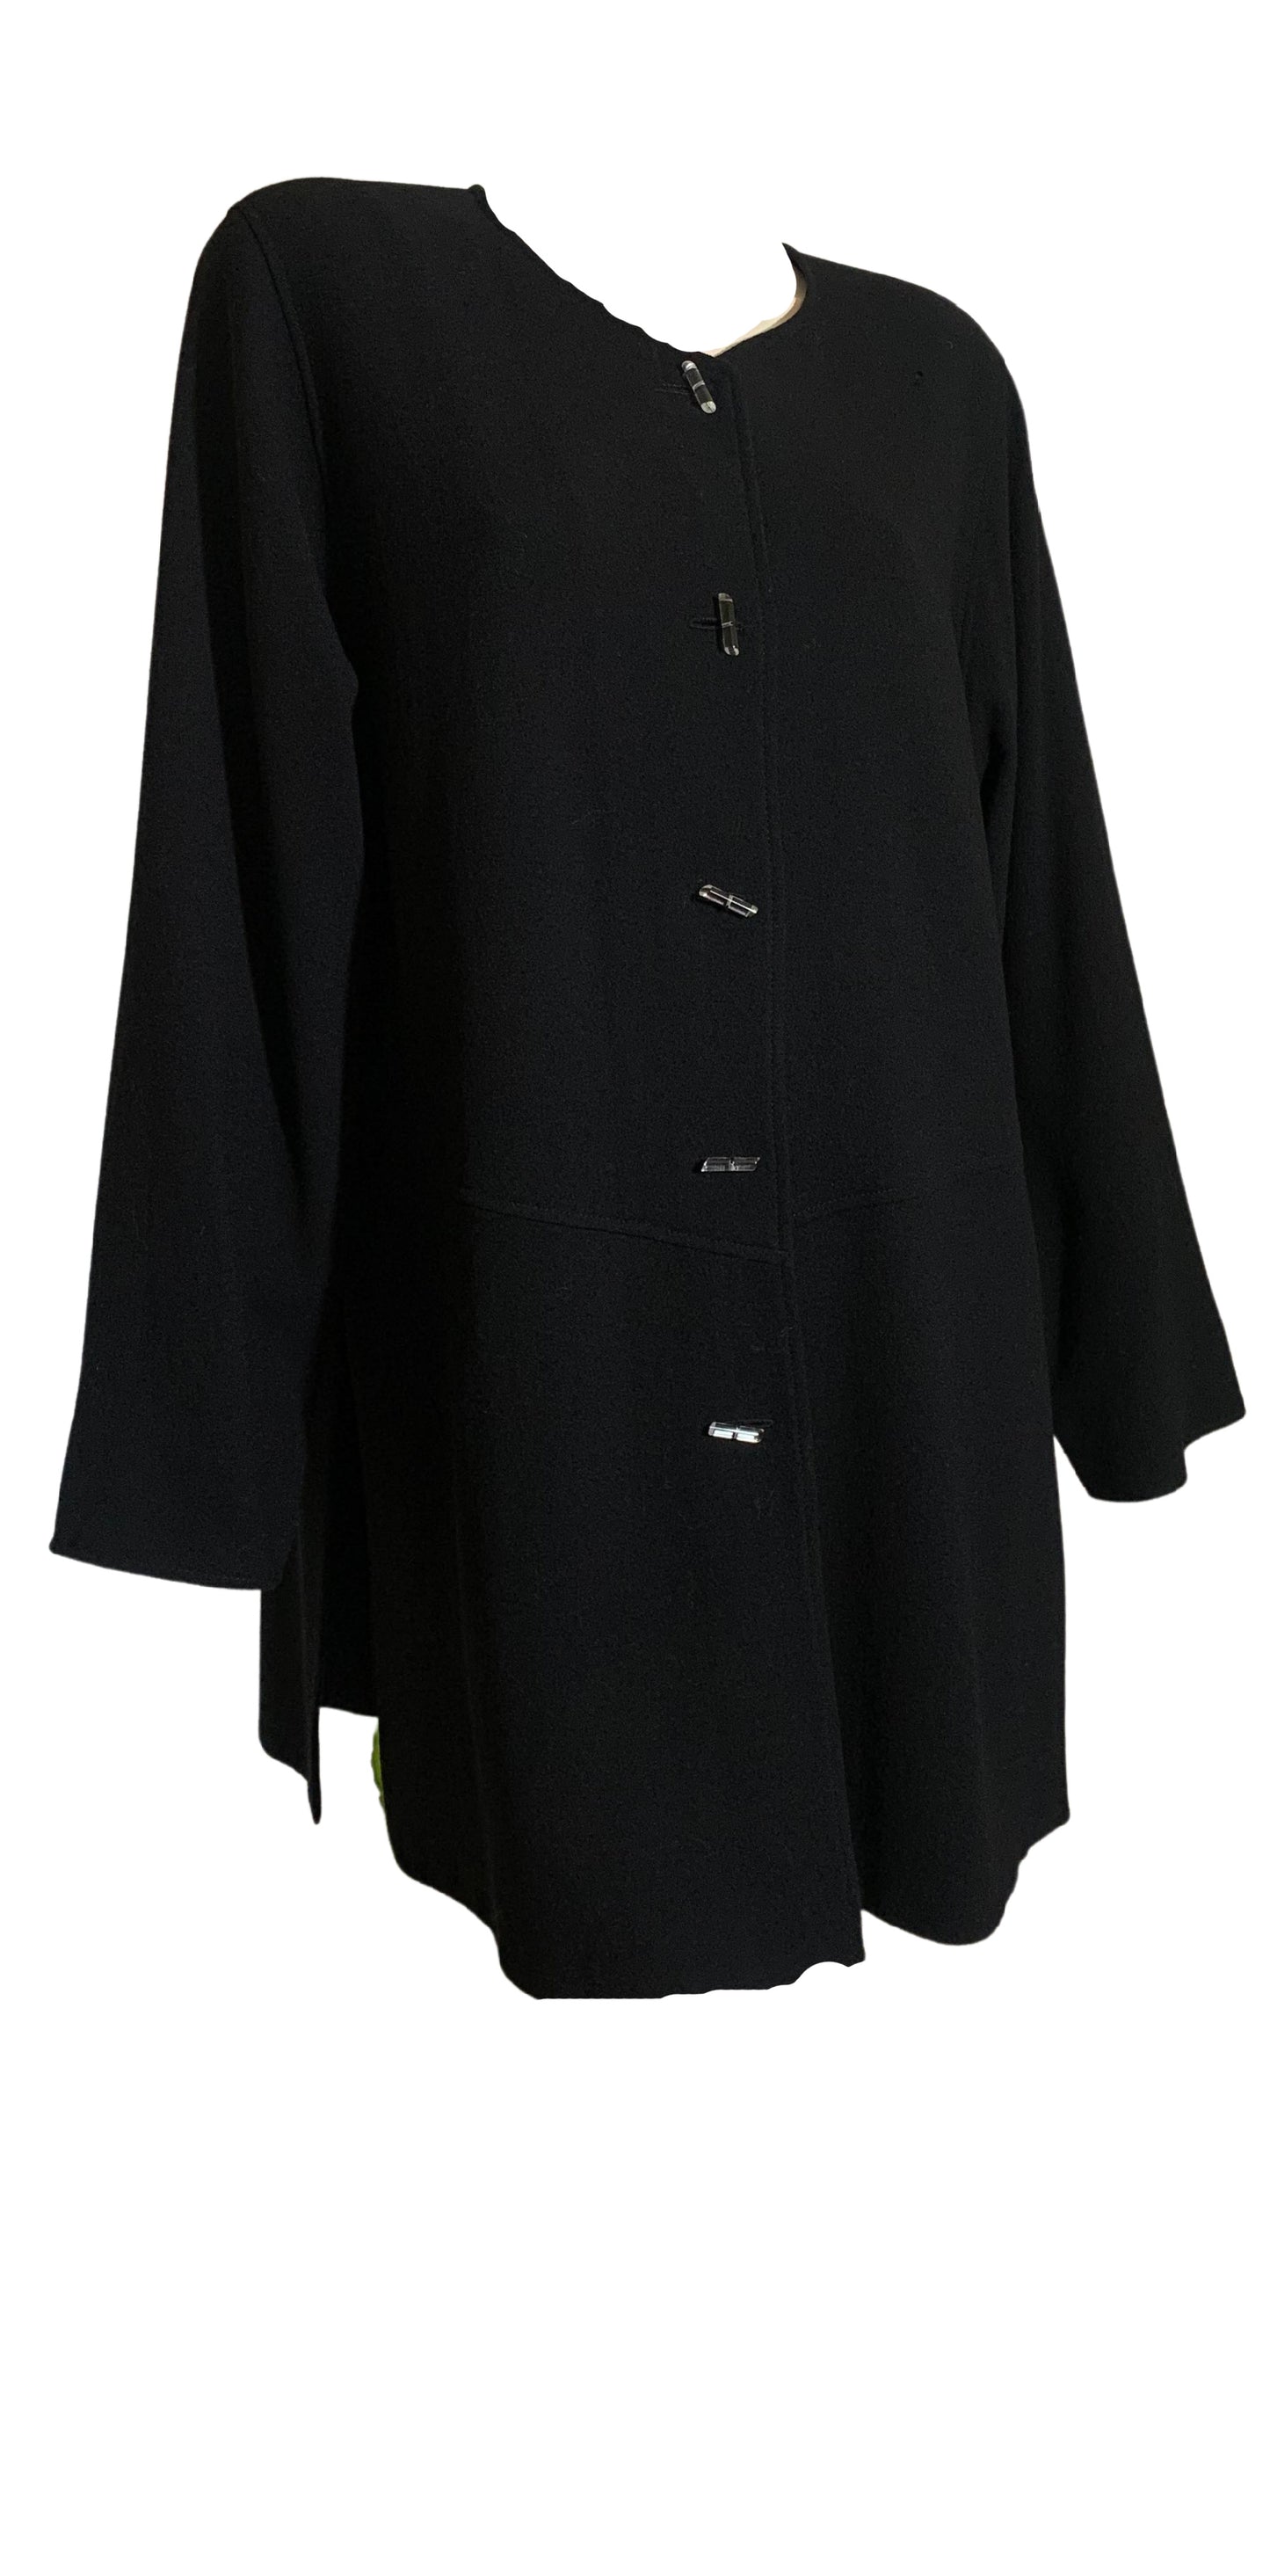 Black Wool Loose Cut Jacket with Lucite Tube Buttons circa 1990s Jean Muir